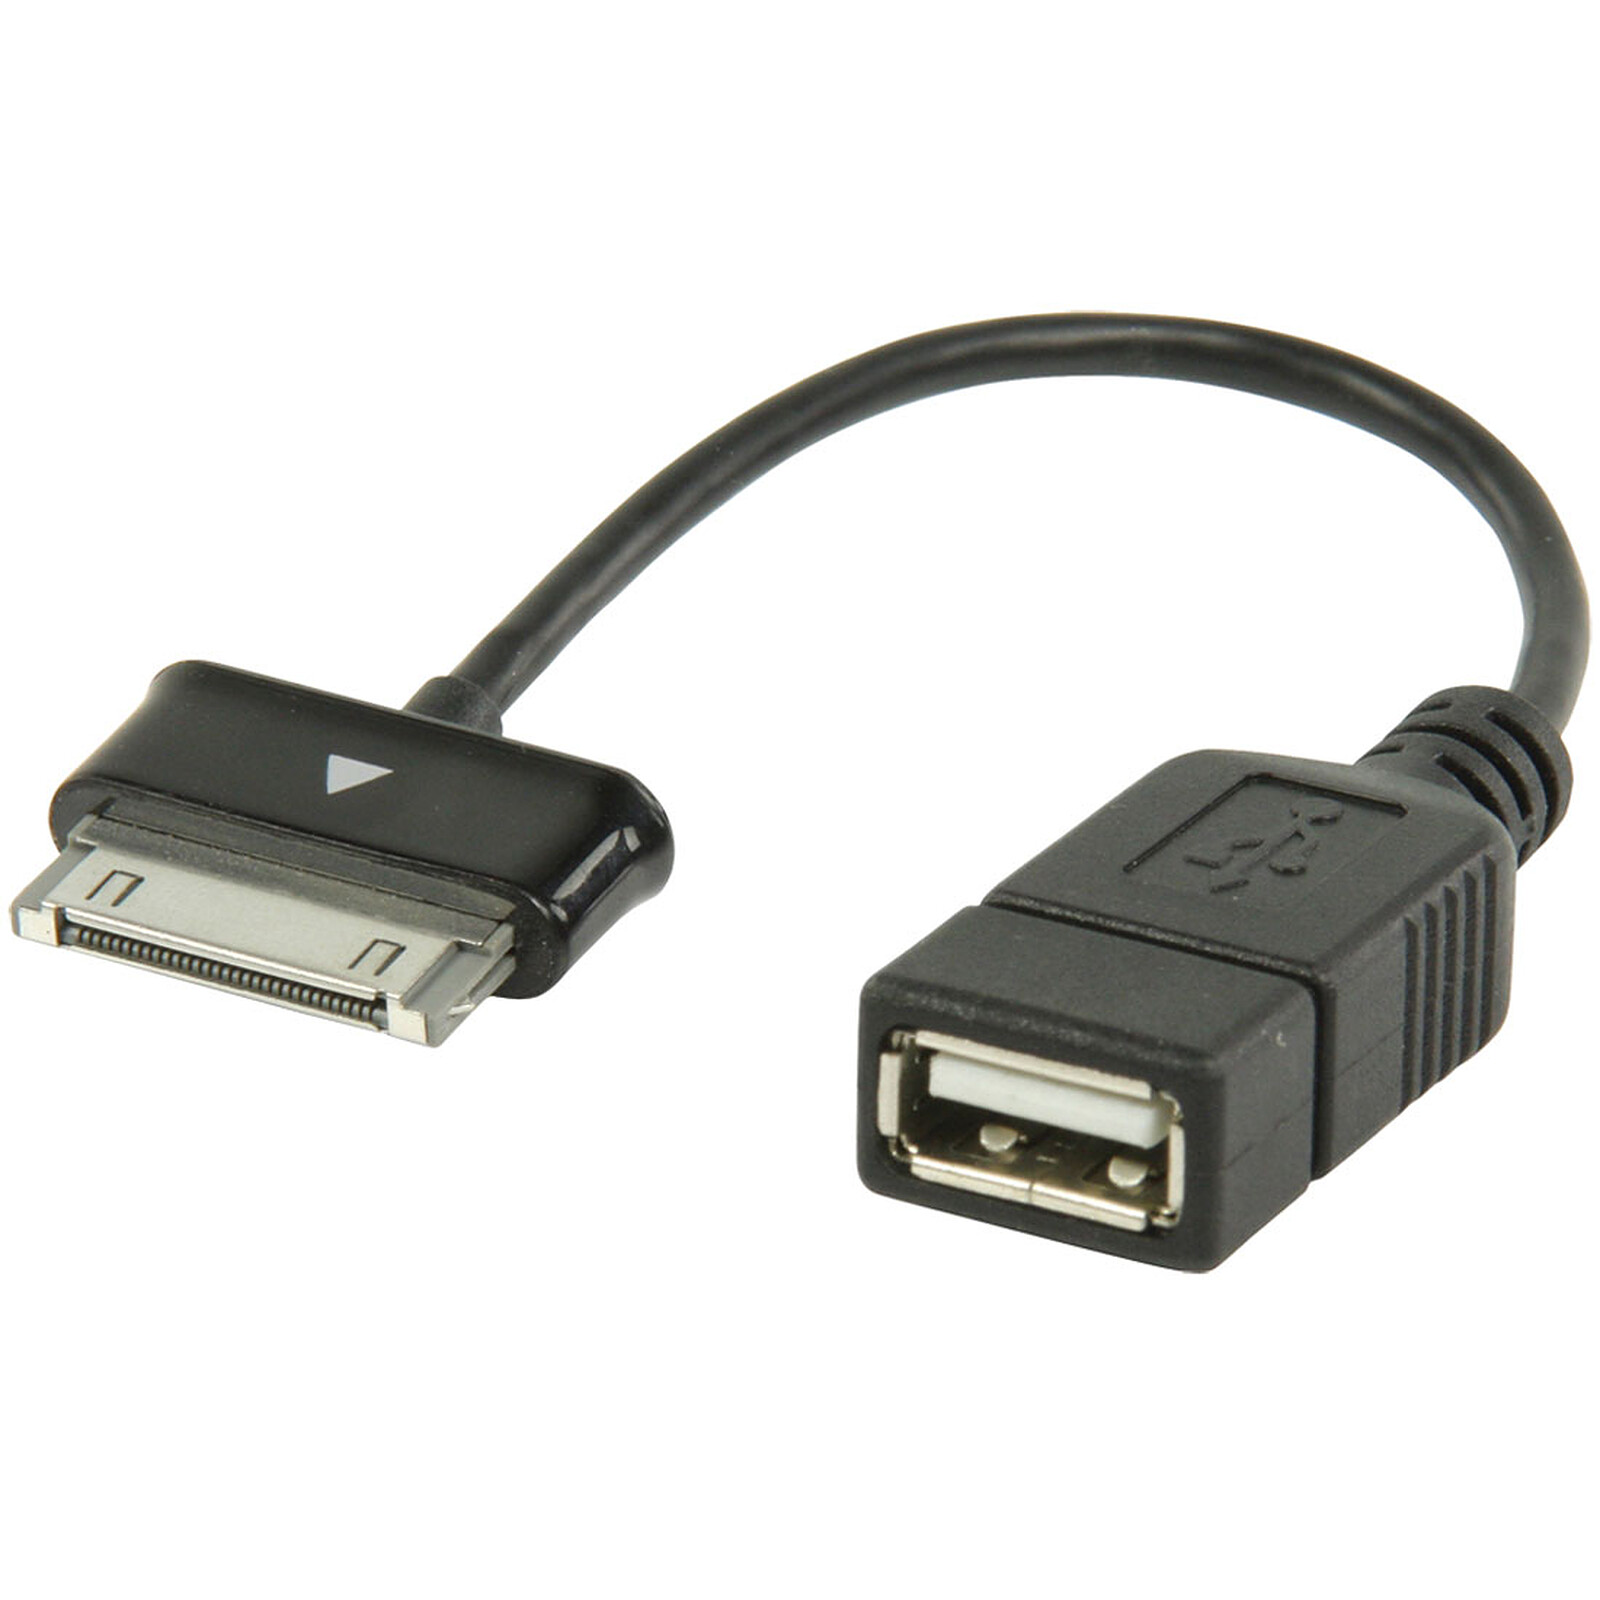 USB 2.0 OTG On-The-Go to Samsung 30 pin adapter - USB on LDLC Holy Moley